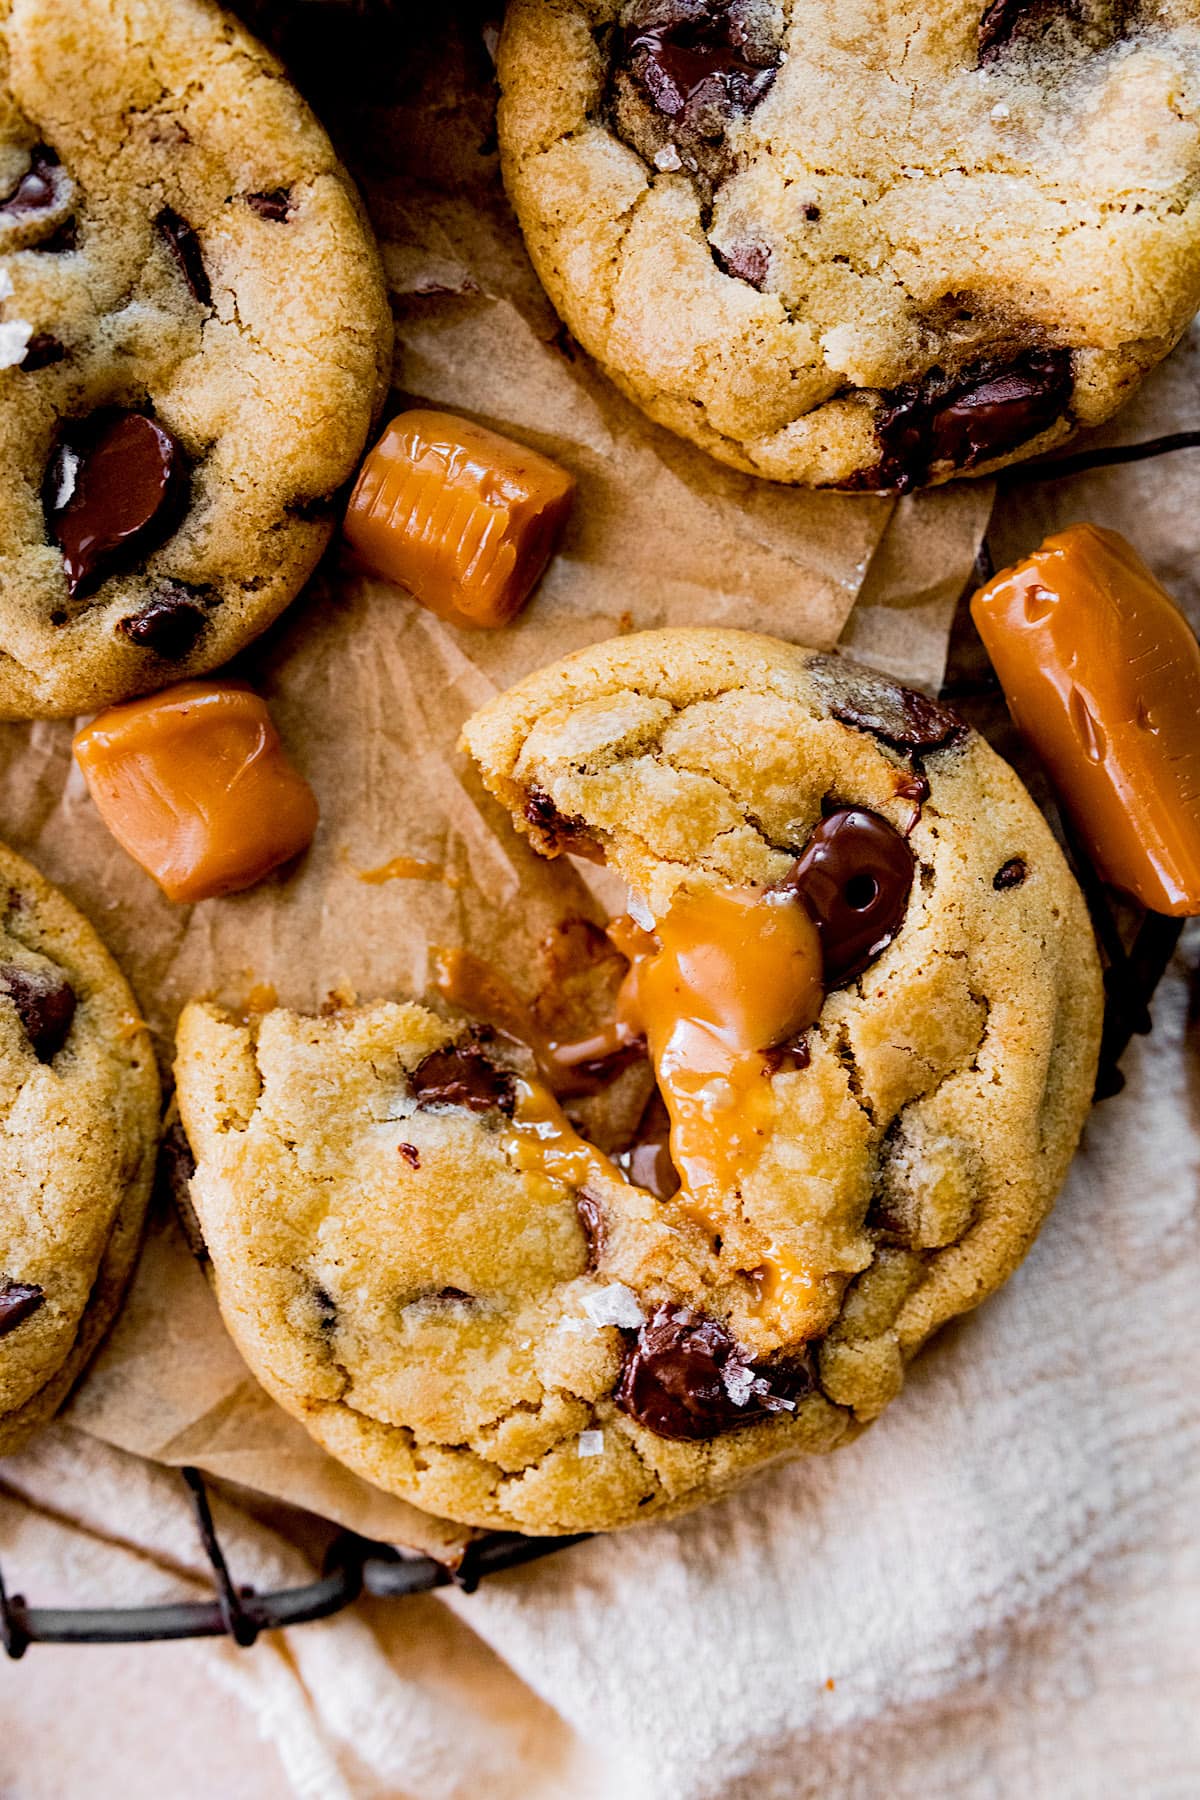 Gluten Free Salted Caramel Chocolate Chip Cookies - Delicious Little Bites